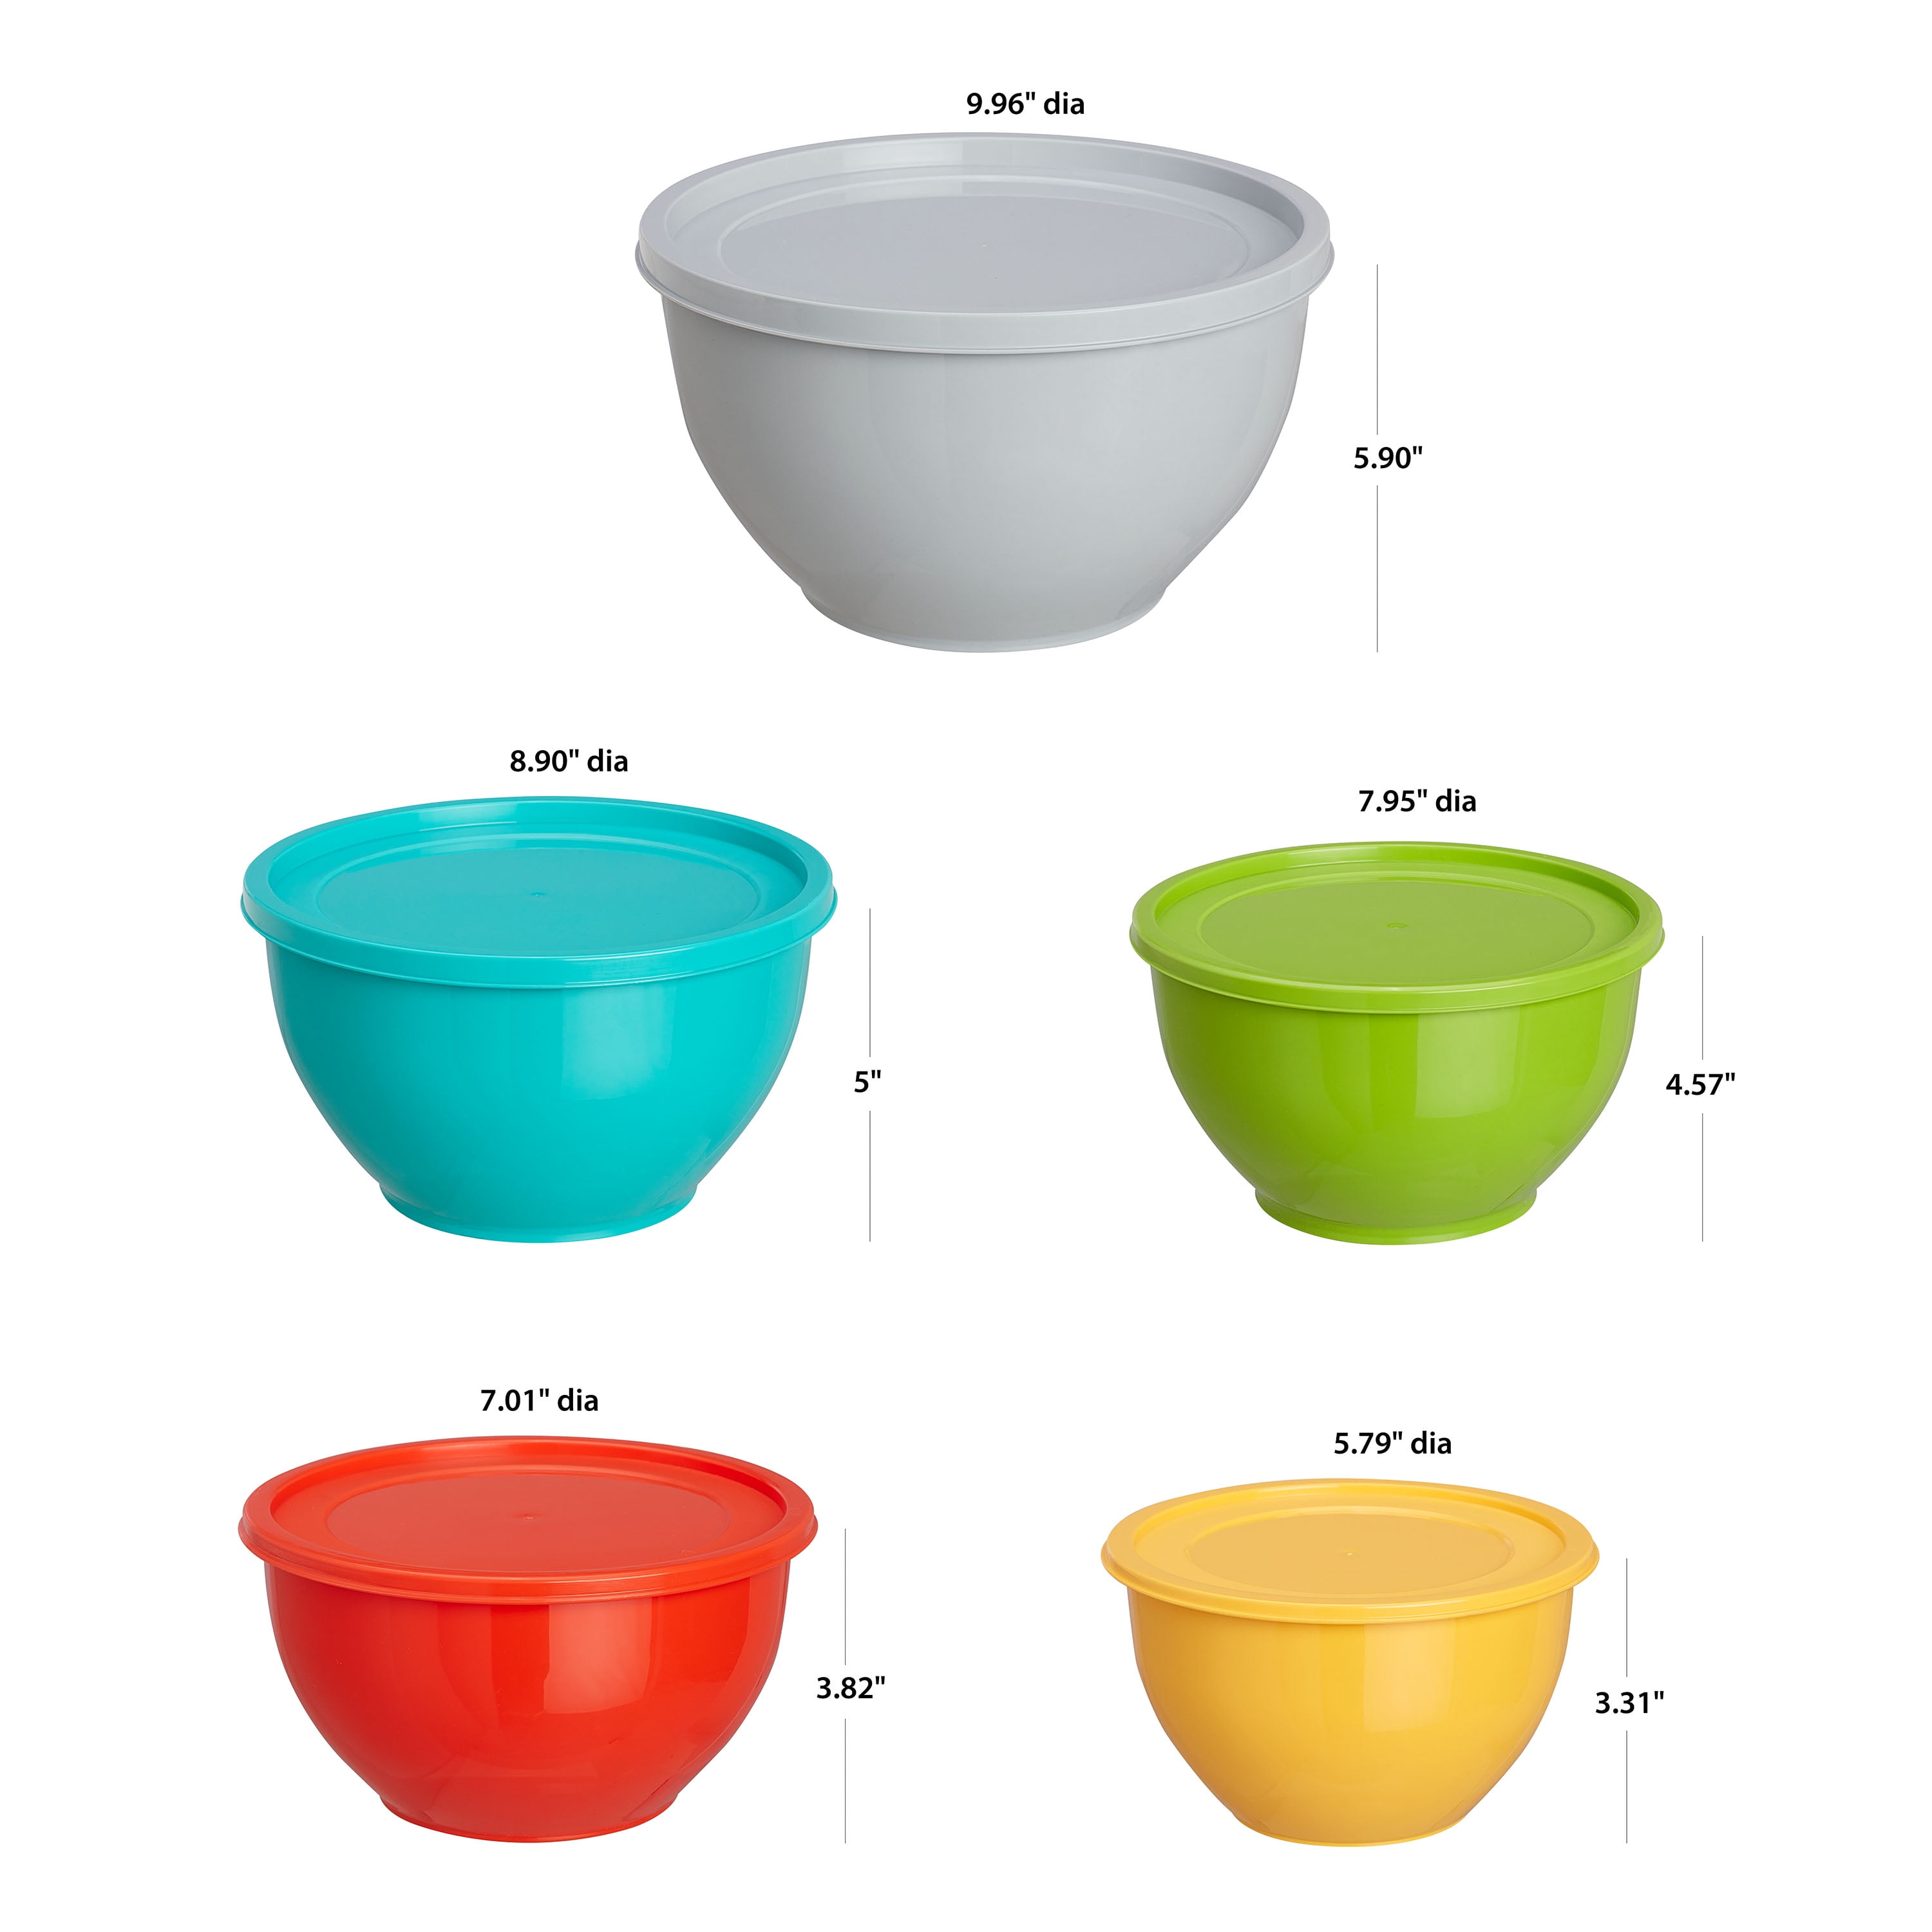 Rae Dunn Mixing Bowls with Lids - 10 Piece Plastic Nesting Bowls Set Includes 5 Prep Bowls and 5 Lids (Black)